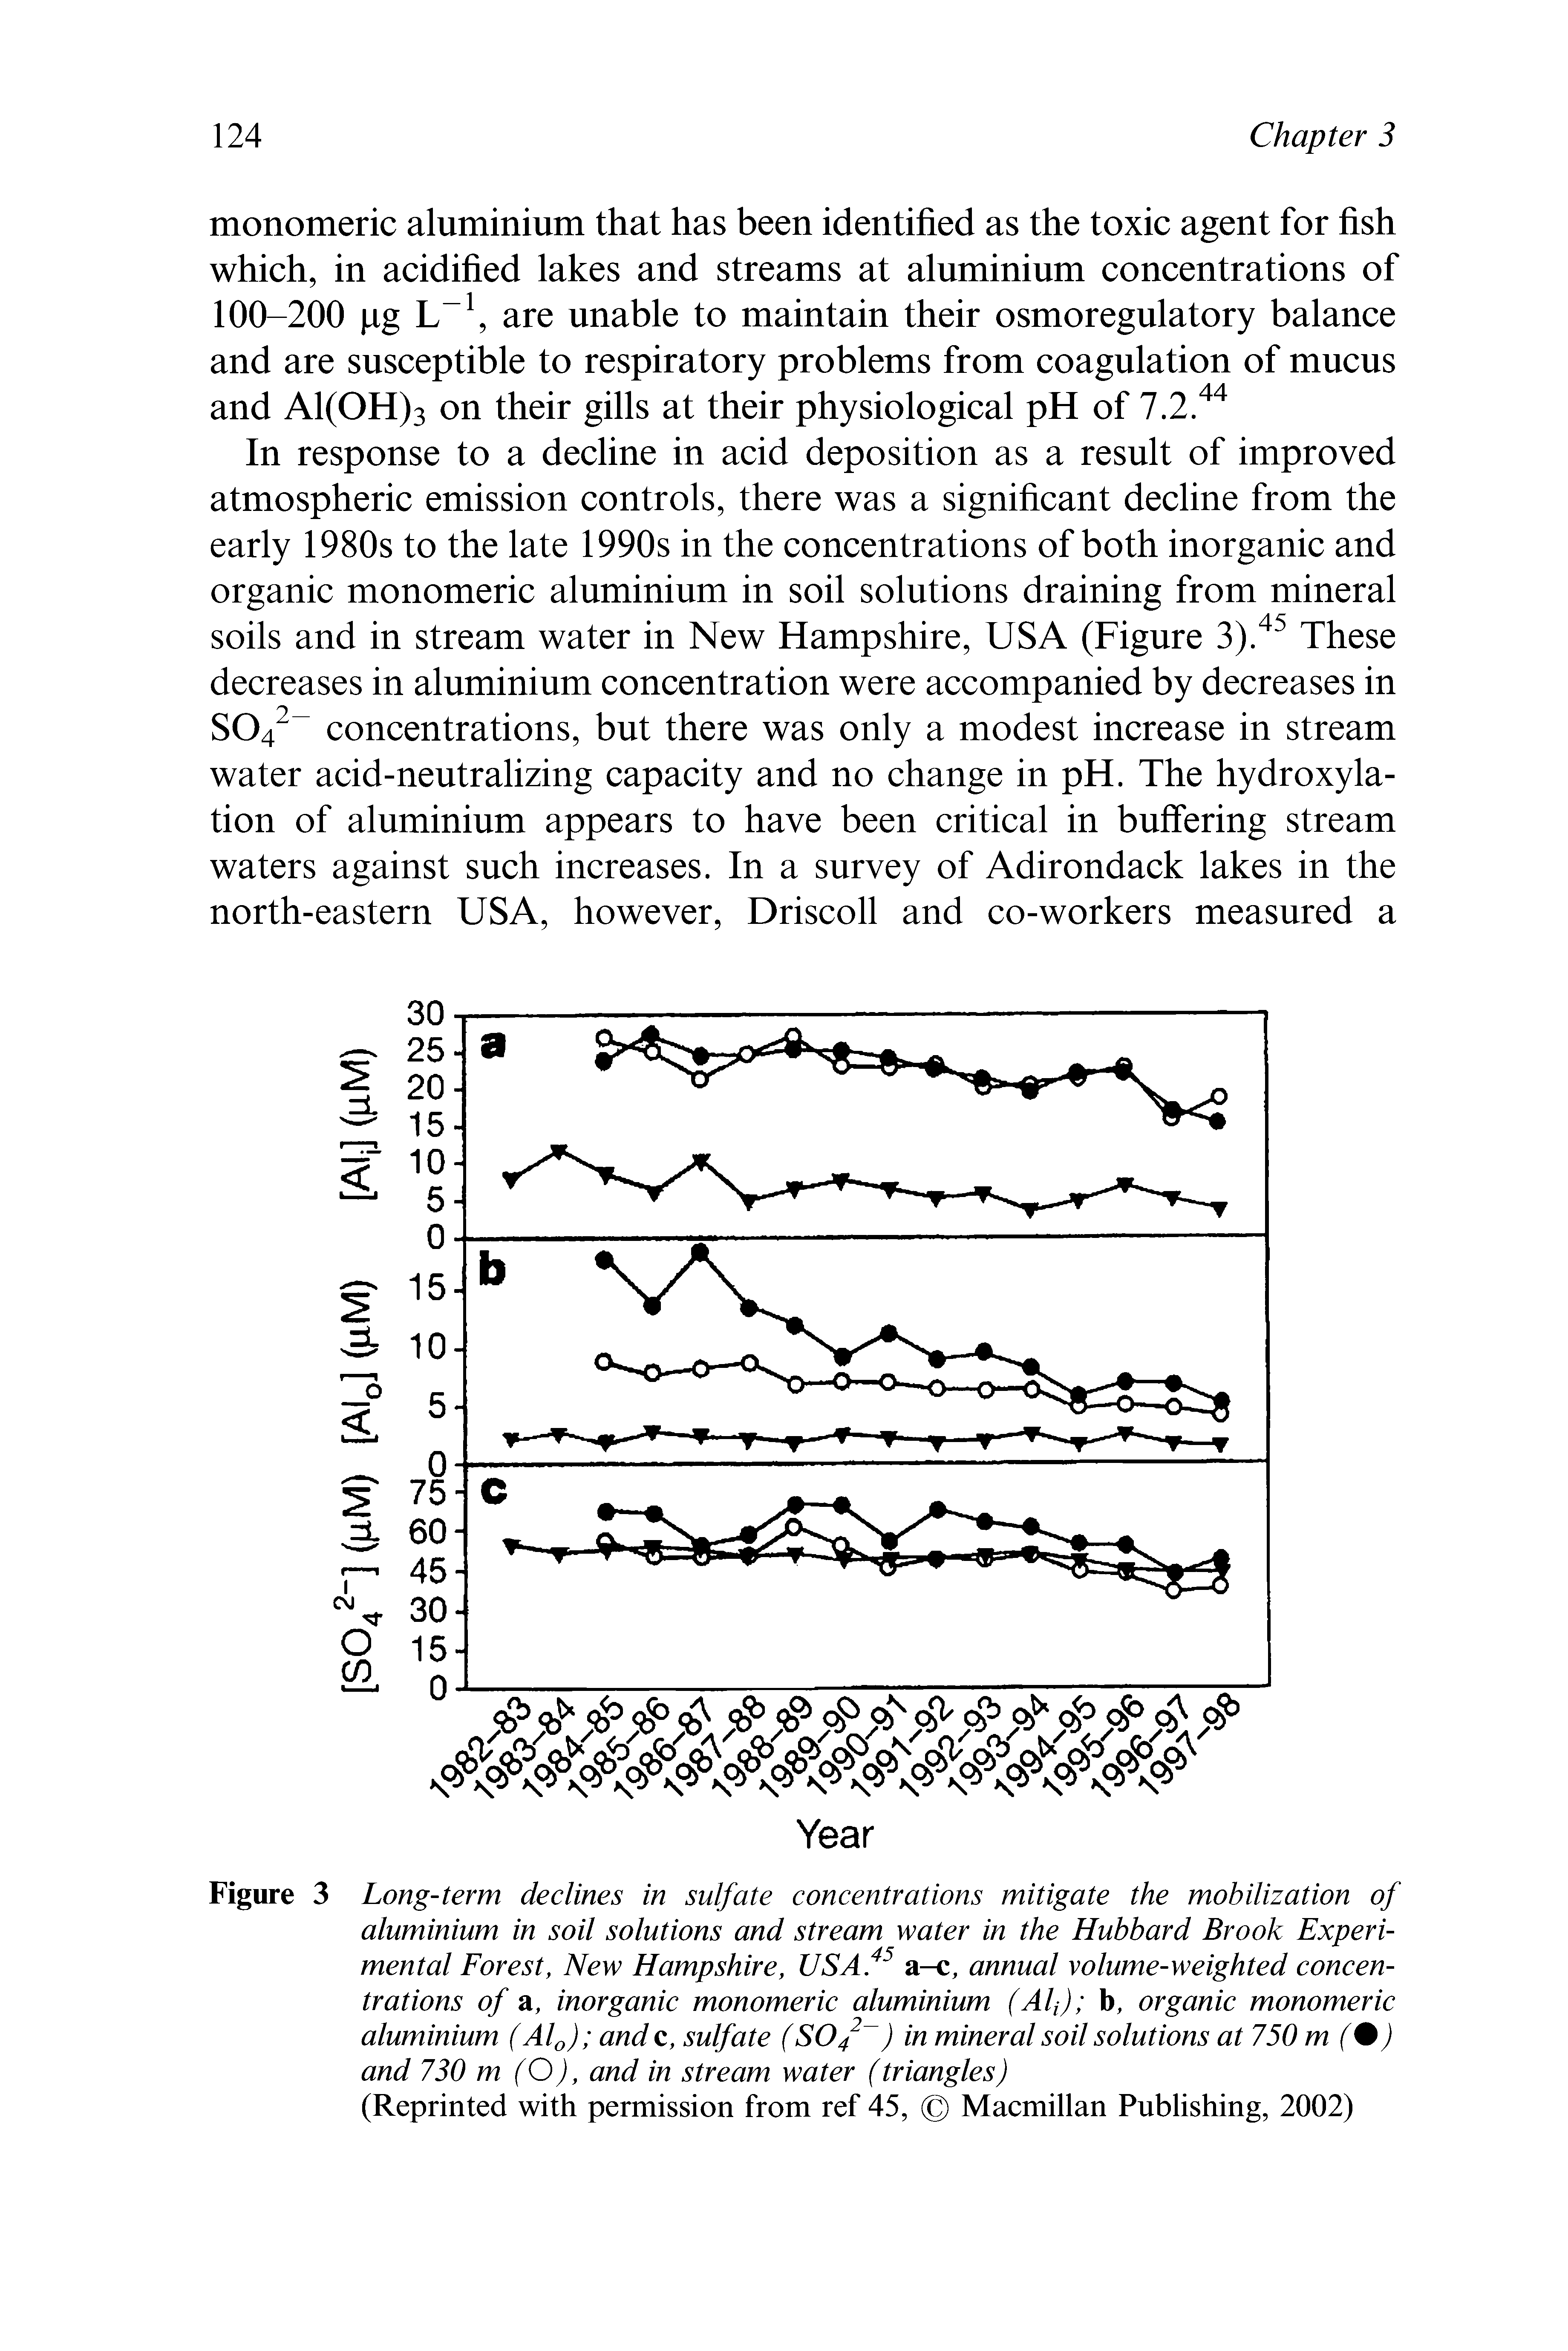 Figure 3 Long-term declines in sulfate concentrations mitigate the mobilization of aluminium in soil solutions and stream water in the Hubbard Brook Experimental Forest, New Hampshire, USAf a-c, annual volume-weighted concentrations of a, inorganic monomeric aluminium (Ah) b, organic monomeric aluminium (Af) and c, sulfate (SO/ ) in mineral soil solutions at 750 m (%) and 730 m (O), and in stream water (triangles)...